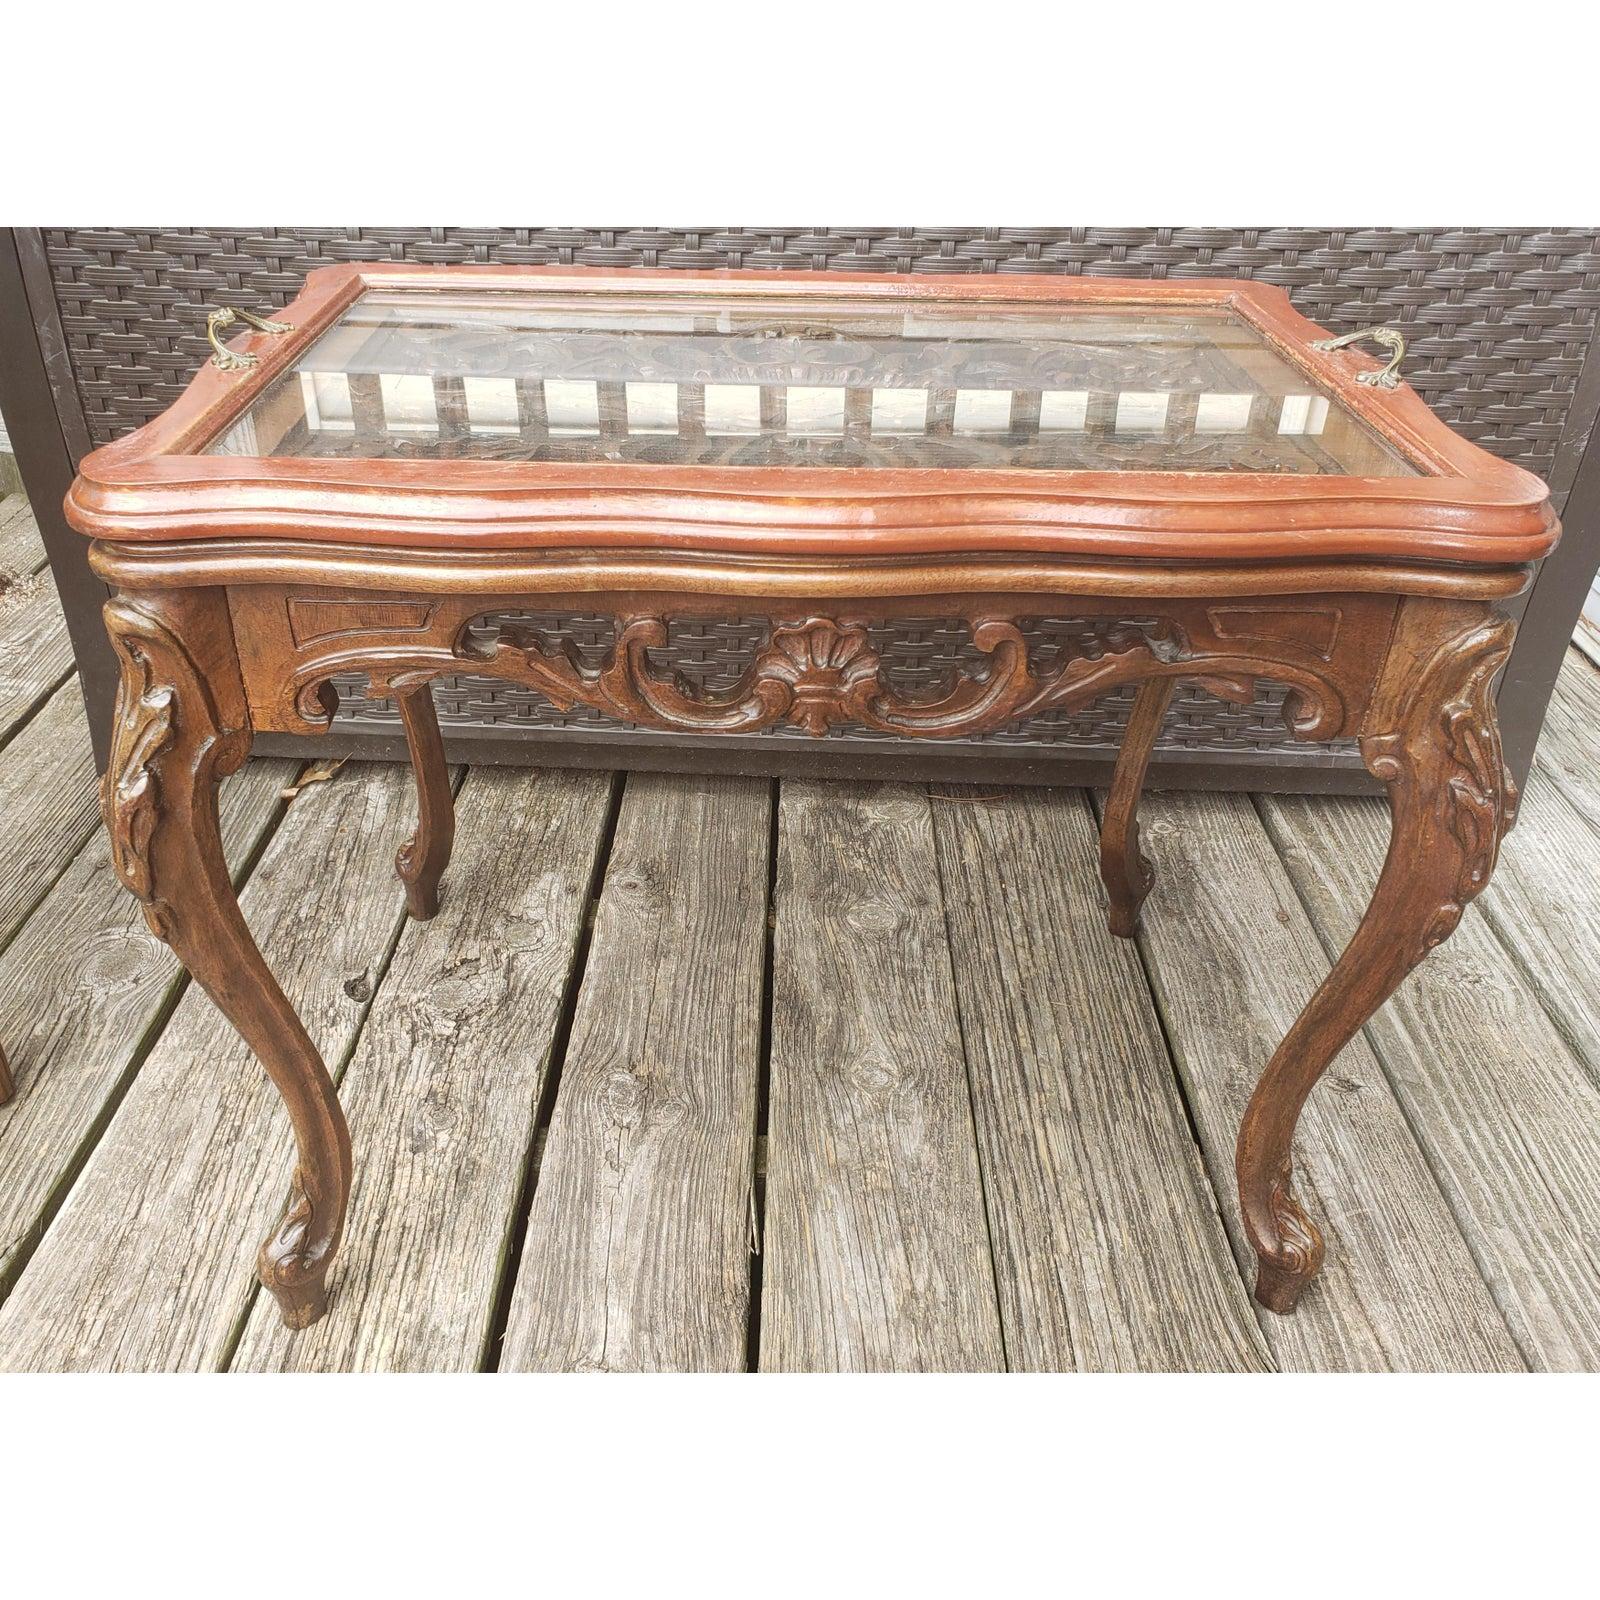 Rare antique intricately hand carved solid walnut tray table. Glass tray comes loose. Brass tray handles.